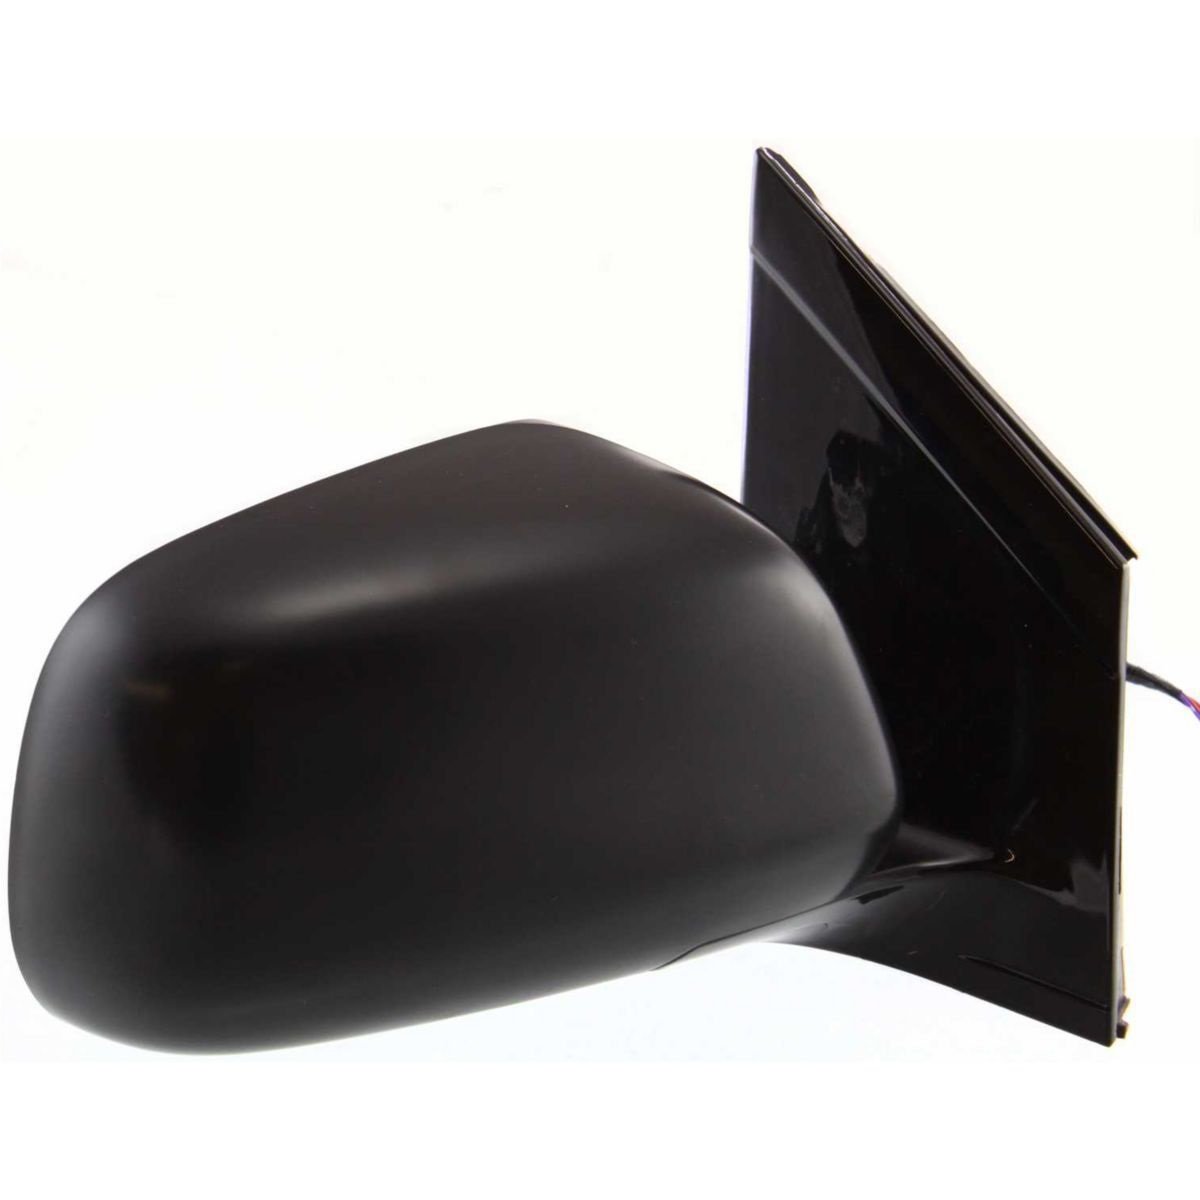 2008 Lexus RX350 : Side View Mirror Painted